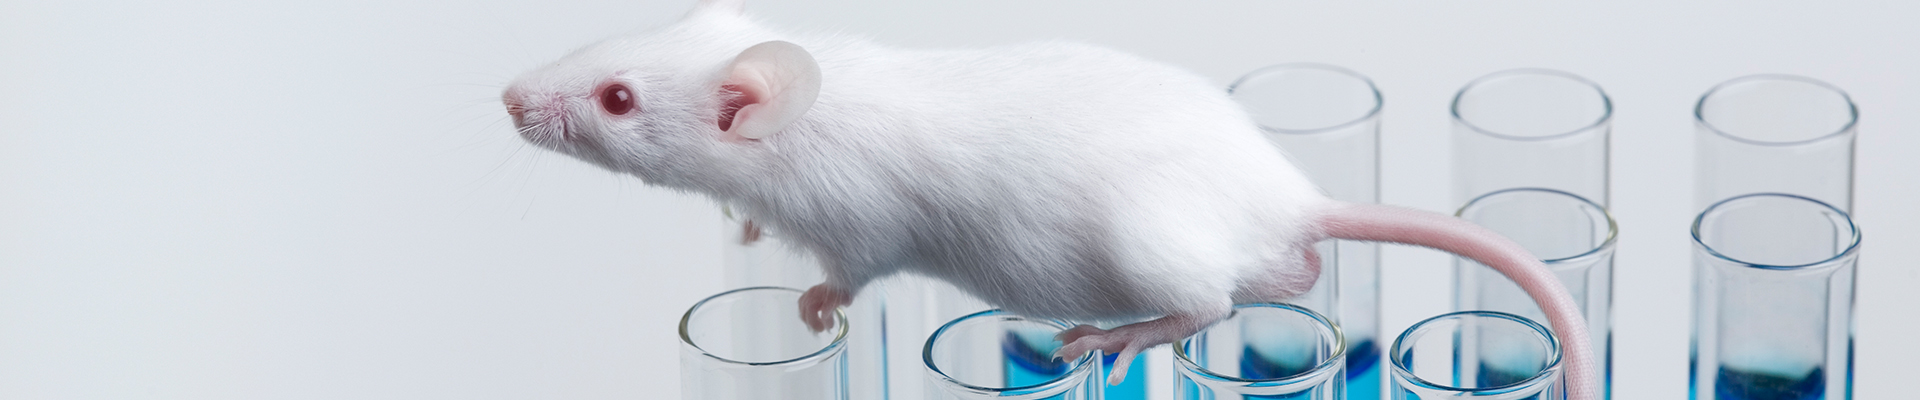 white mouse sitting in glass petri dish